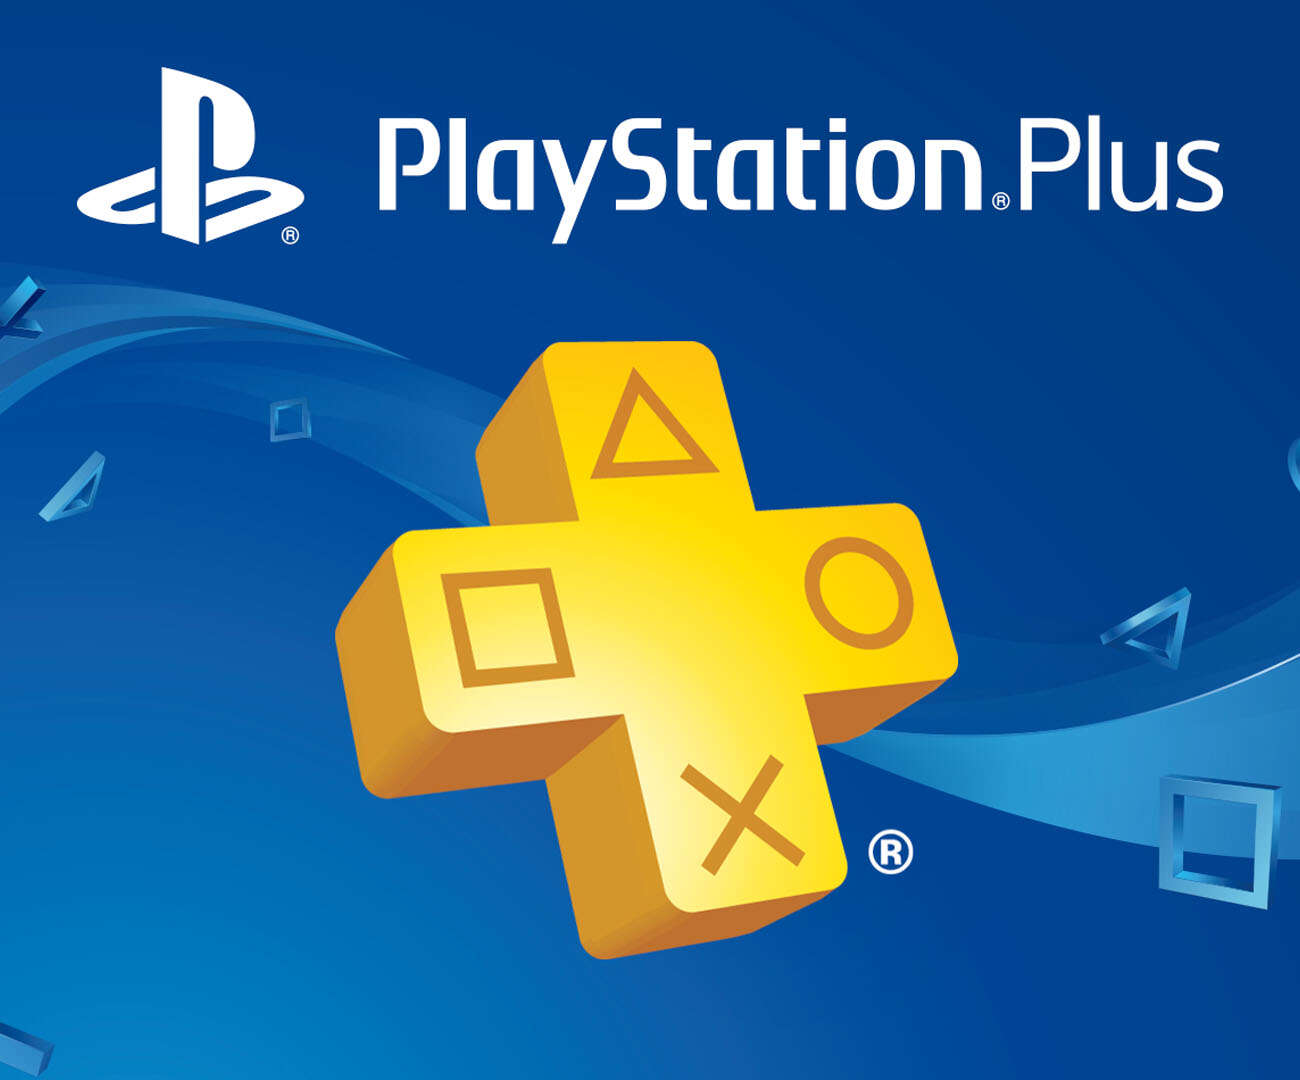 ps+, playstation plus